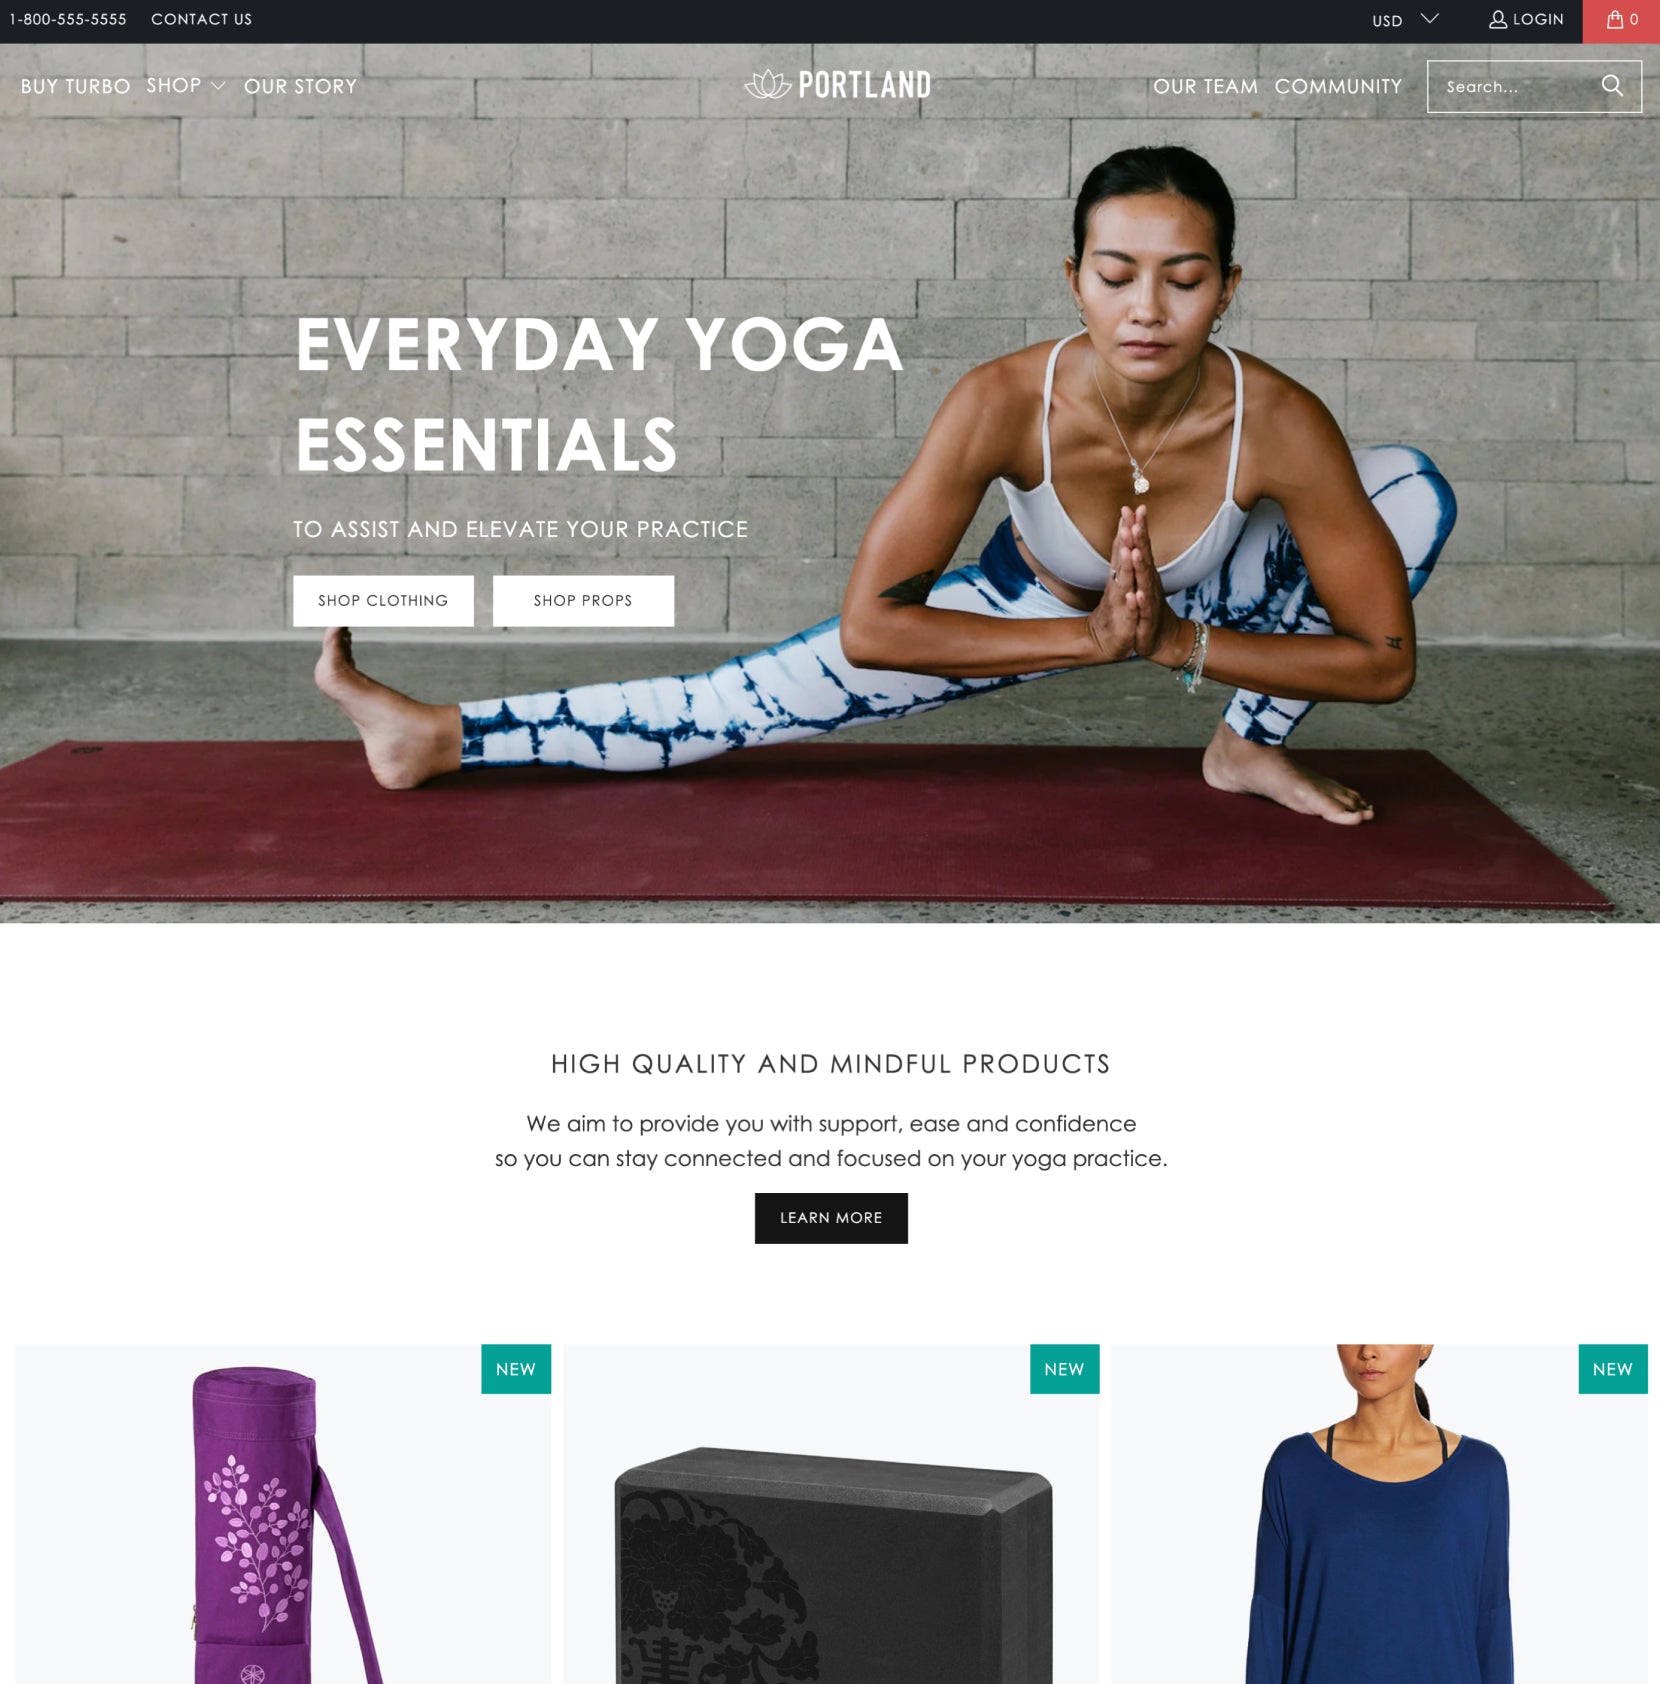 Screenshot of Turbo Shopify theme by Out of the Sandbox. Screenshot shows an online yoga apparel store with a woman stretching on a yoga mat and 3 products available: a yoga mat, yoga block, and yoga shirt.